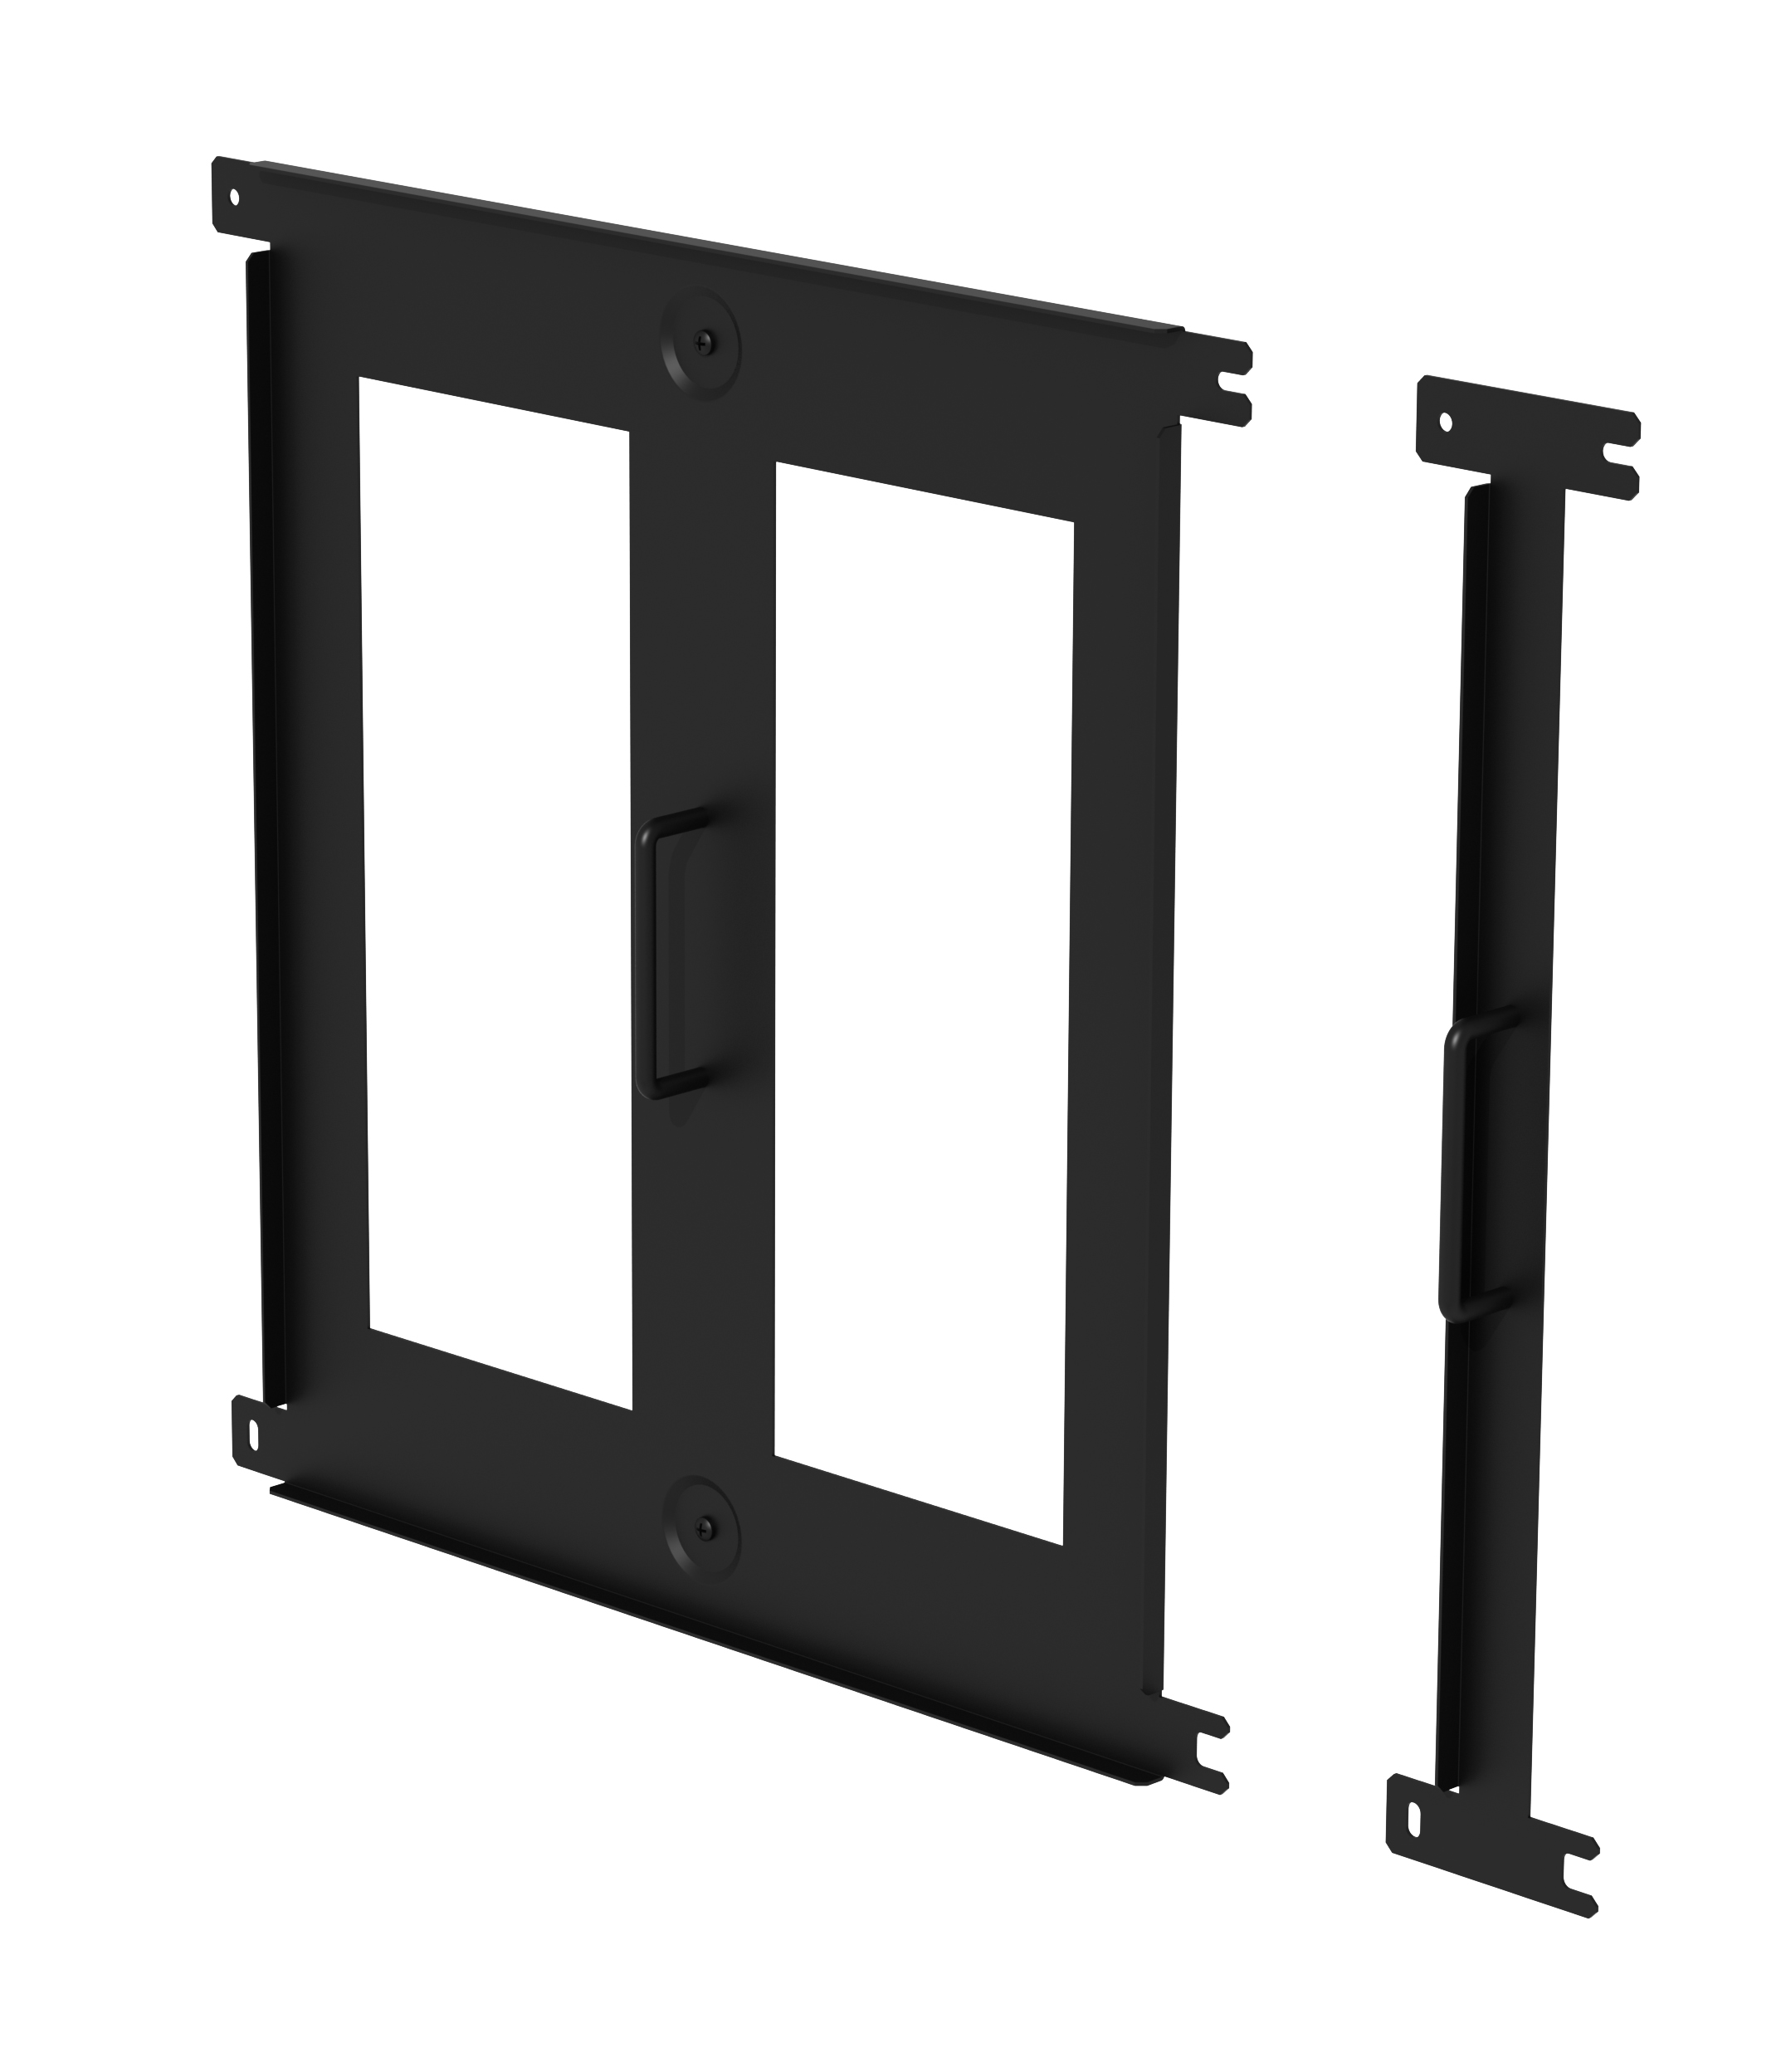 DS-VWRS091 Reusable Video Wall Spacer